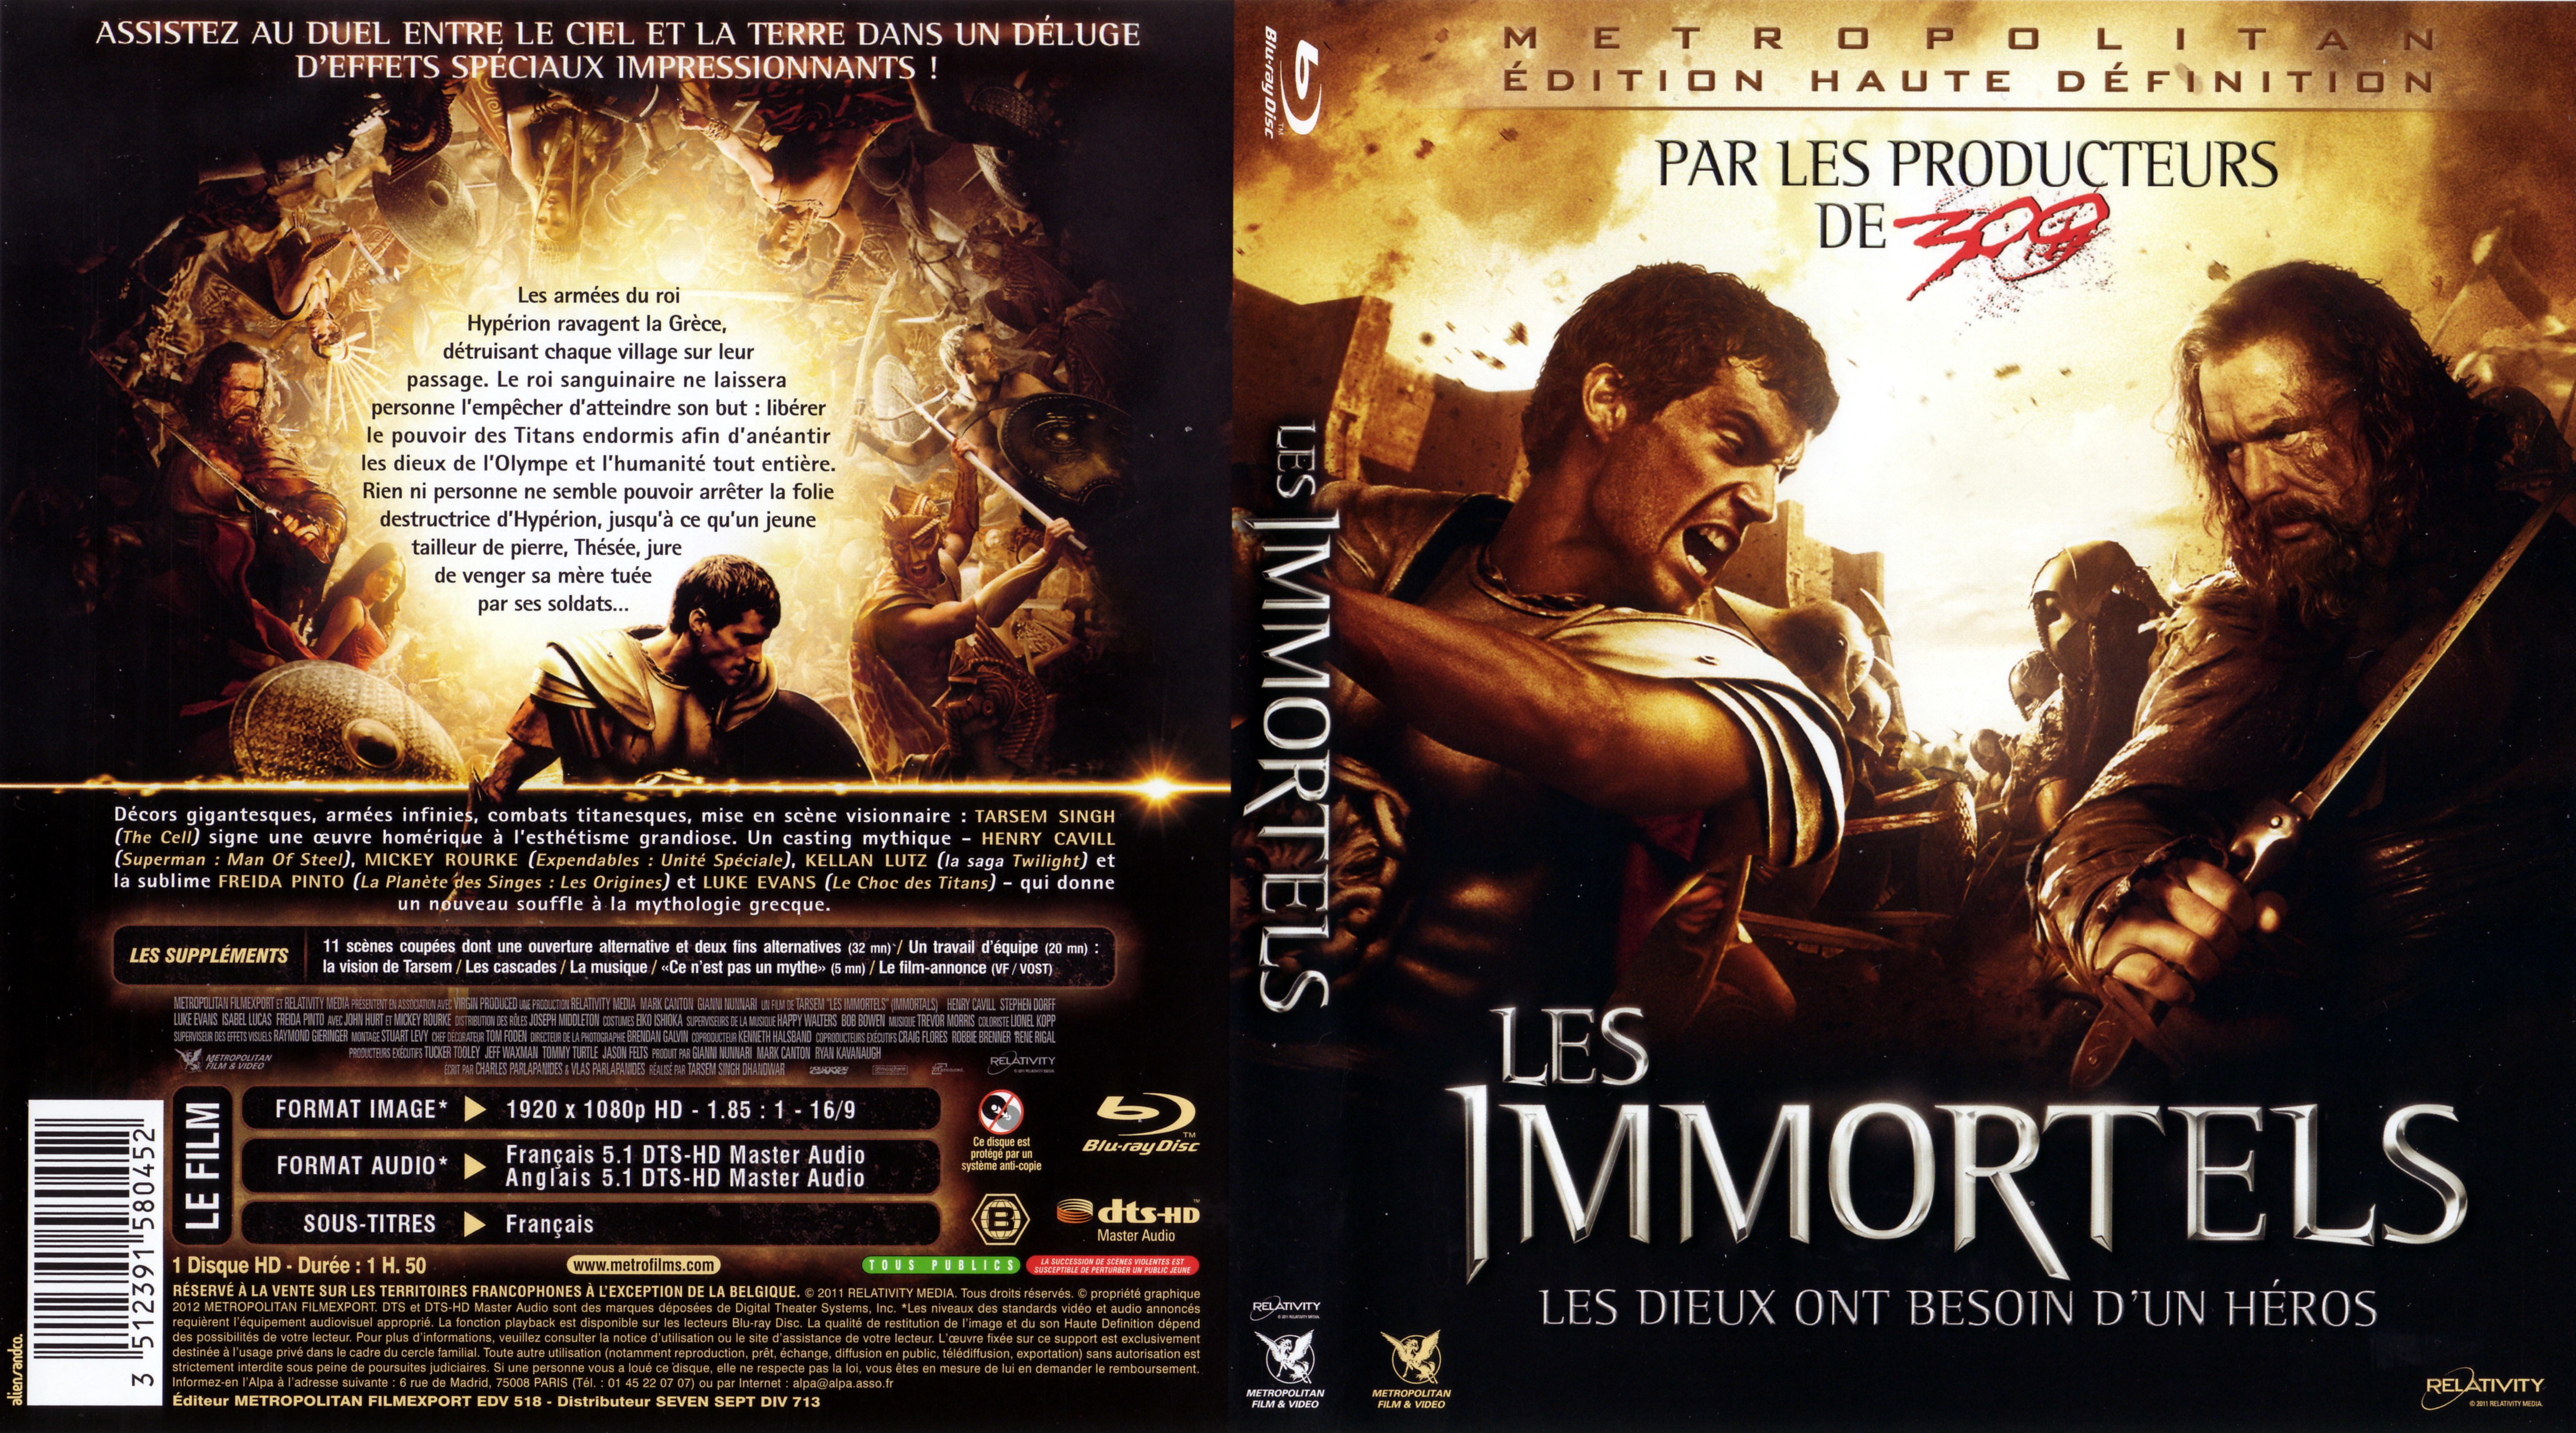 Jaquette DVD Les Immortels (BLU-RAY)